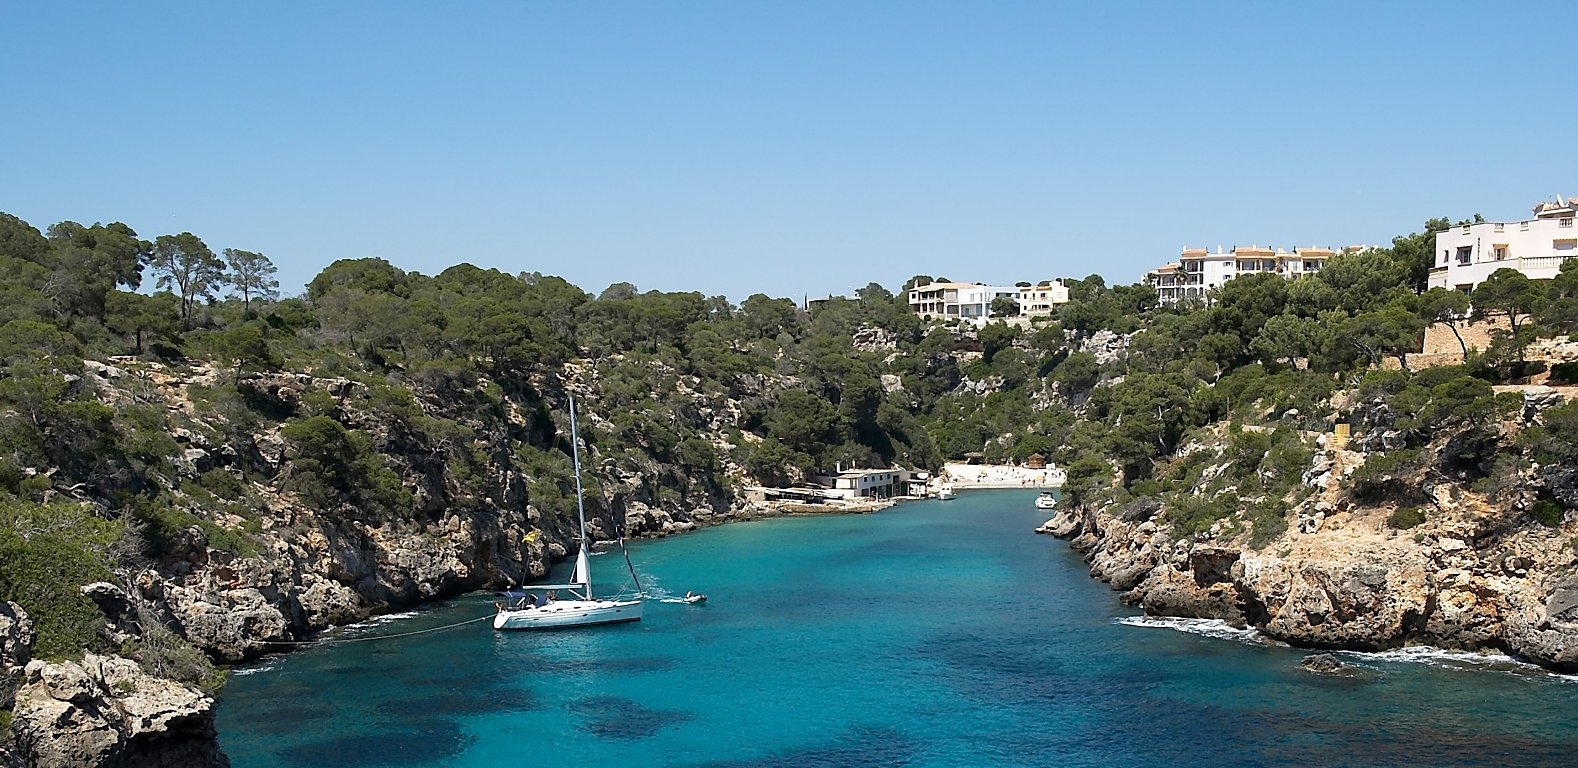 Cala Pi property owners appreciate natural beauty and turquoise sea.